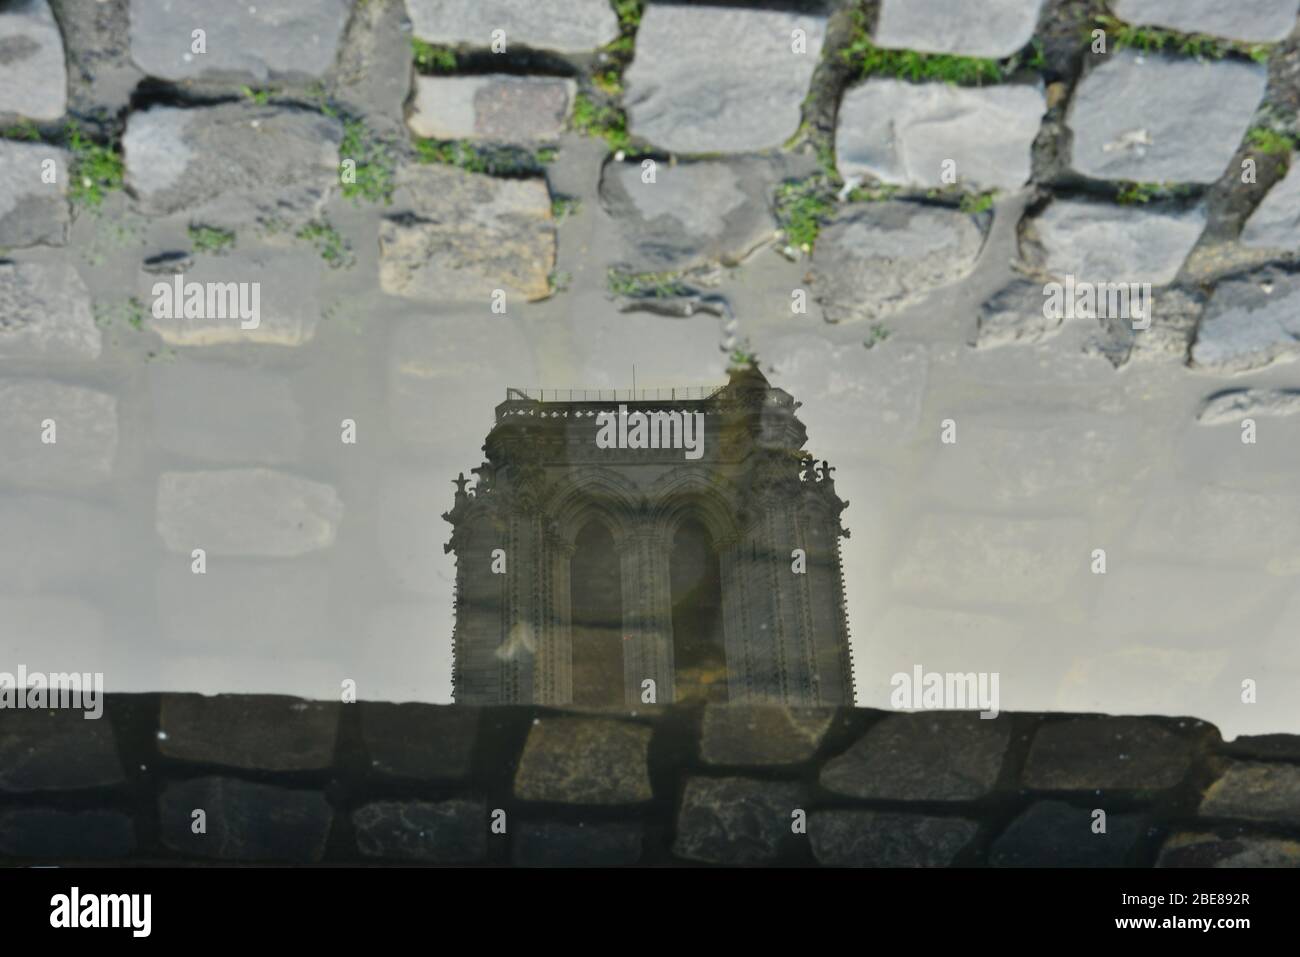 Reflection on water : a different view of Notre-dame Stock Photo